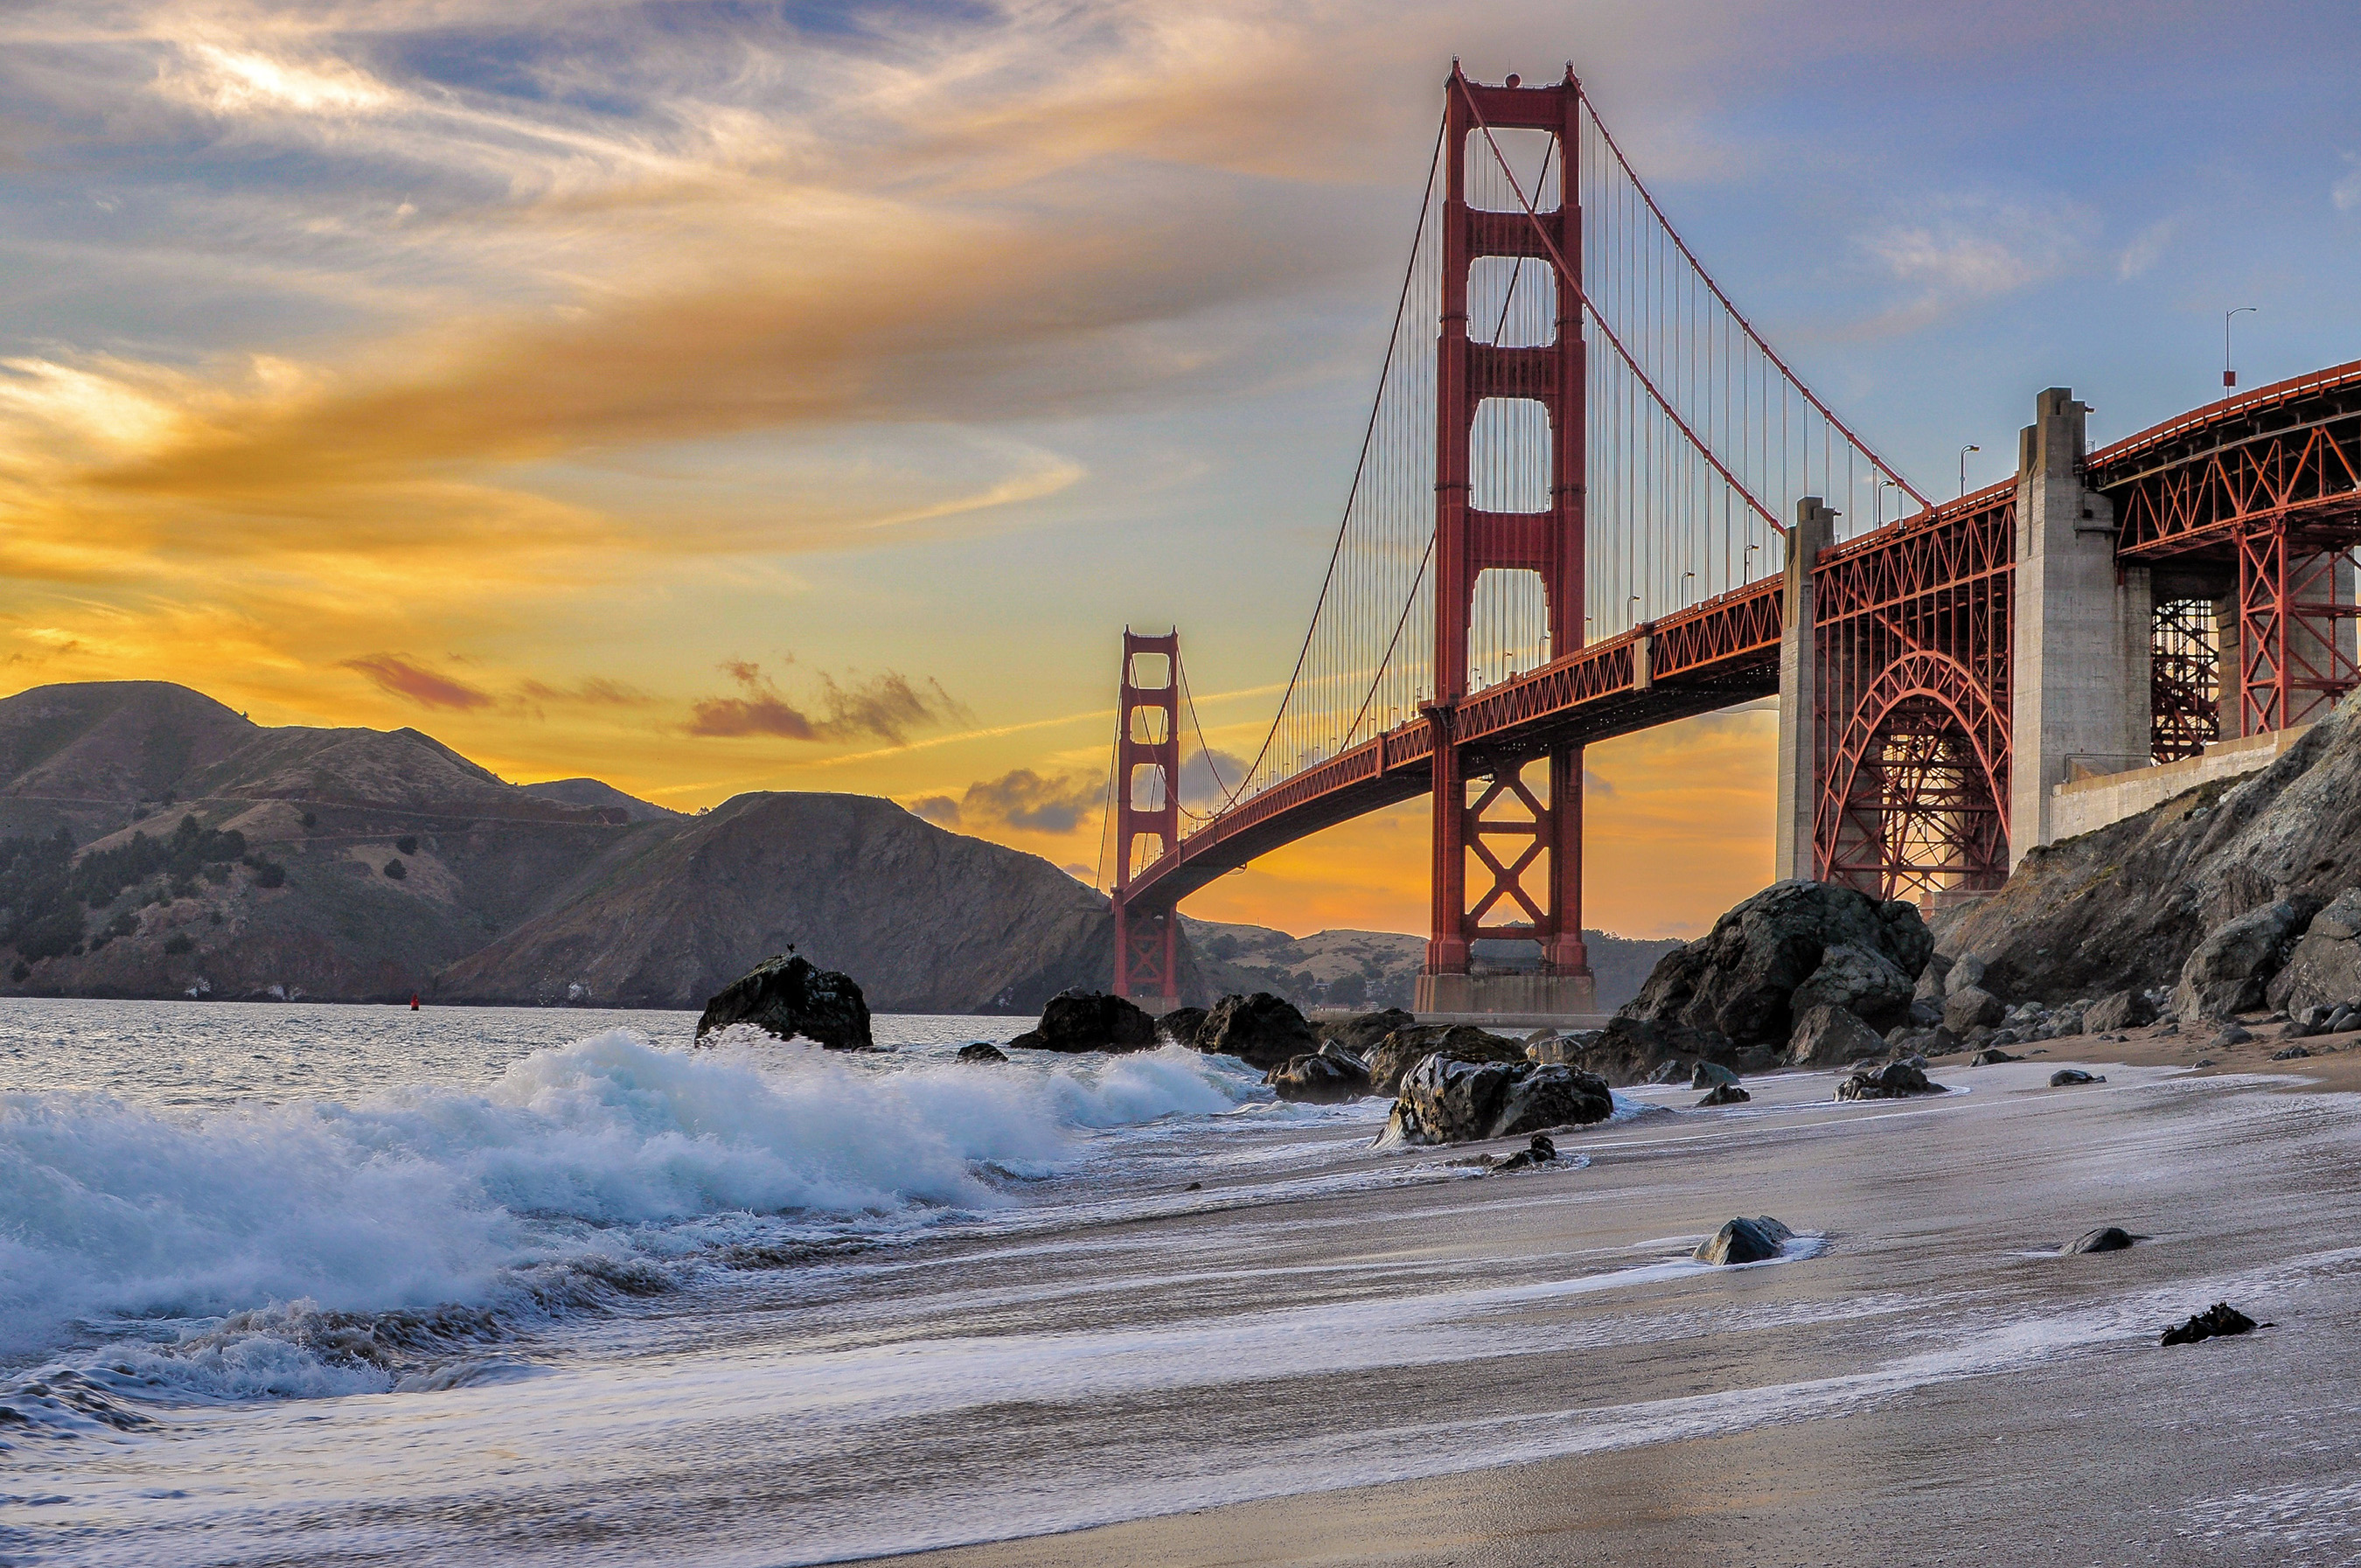 Golden Gate National Recreation Area, Eric DaBreo, Share the Experience 2014 photo contest